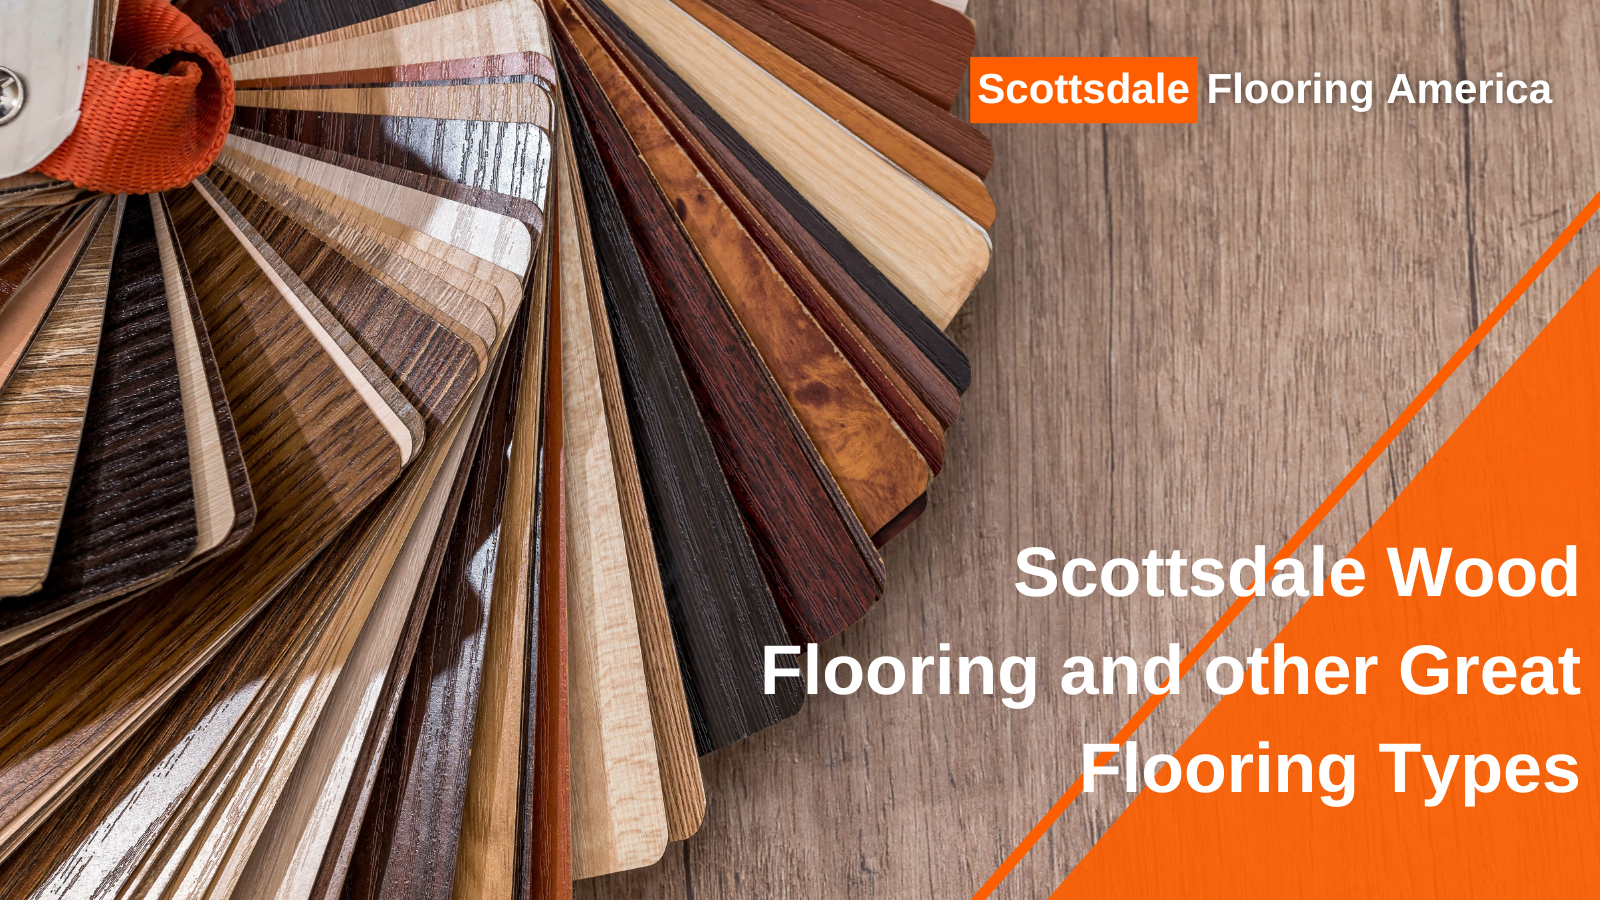 Scottsdale Wood Flooring and other Great Flooring Types